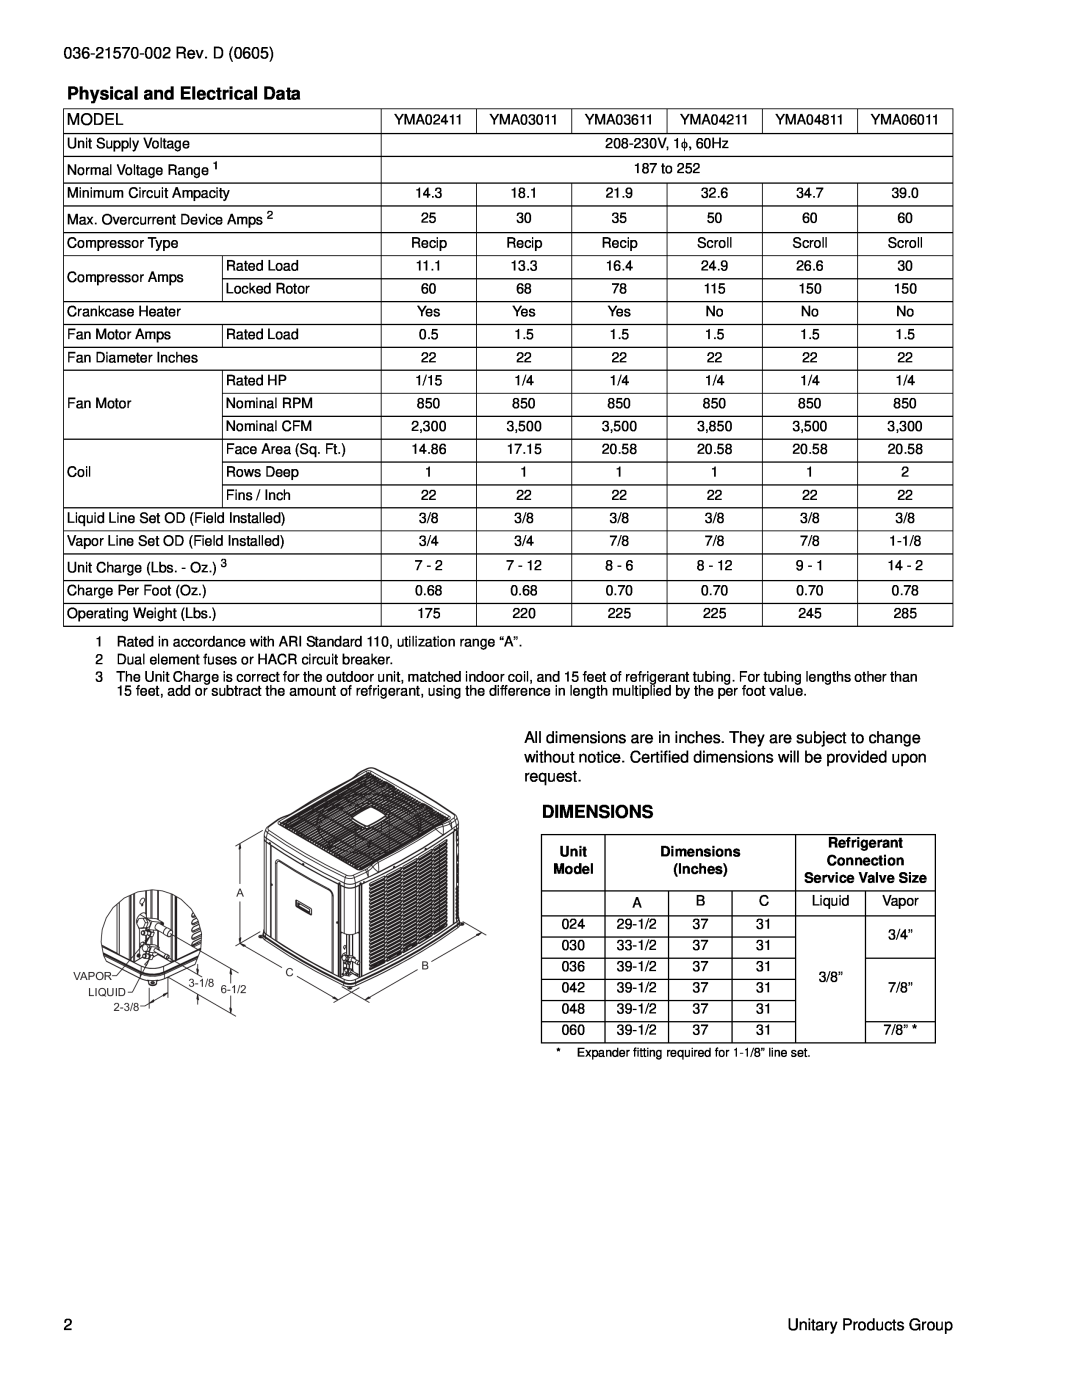 York YMA024 warranty Physical and Electrical Data, Dimensions, 036-21570-002Rev. D, Model 